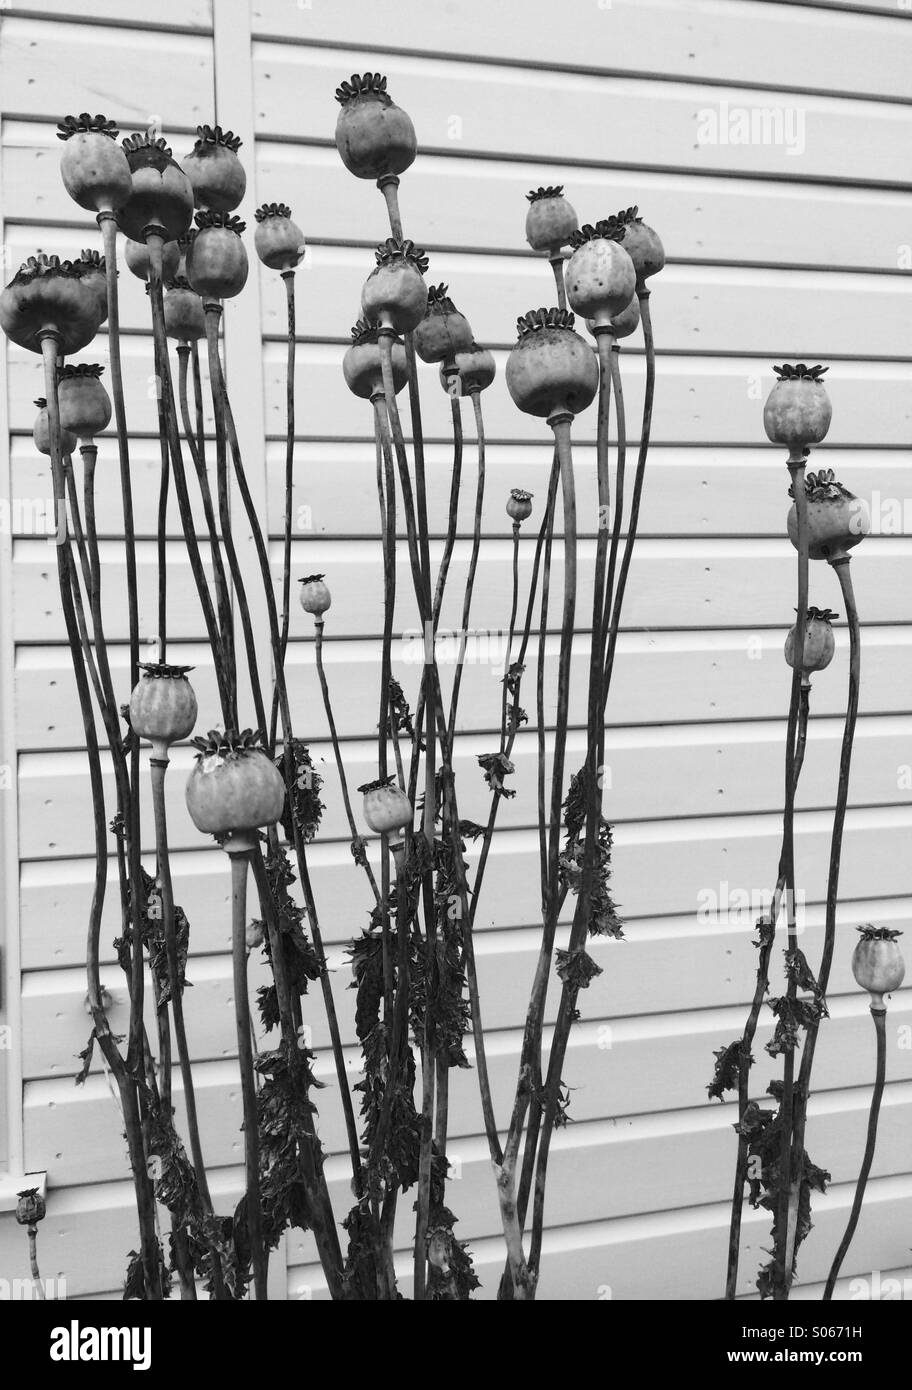 Poppy seed heads against wooden cladding Stock Photo